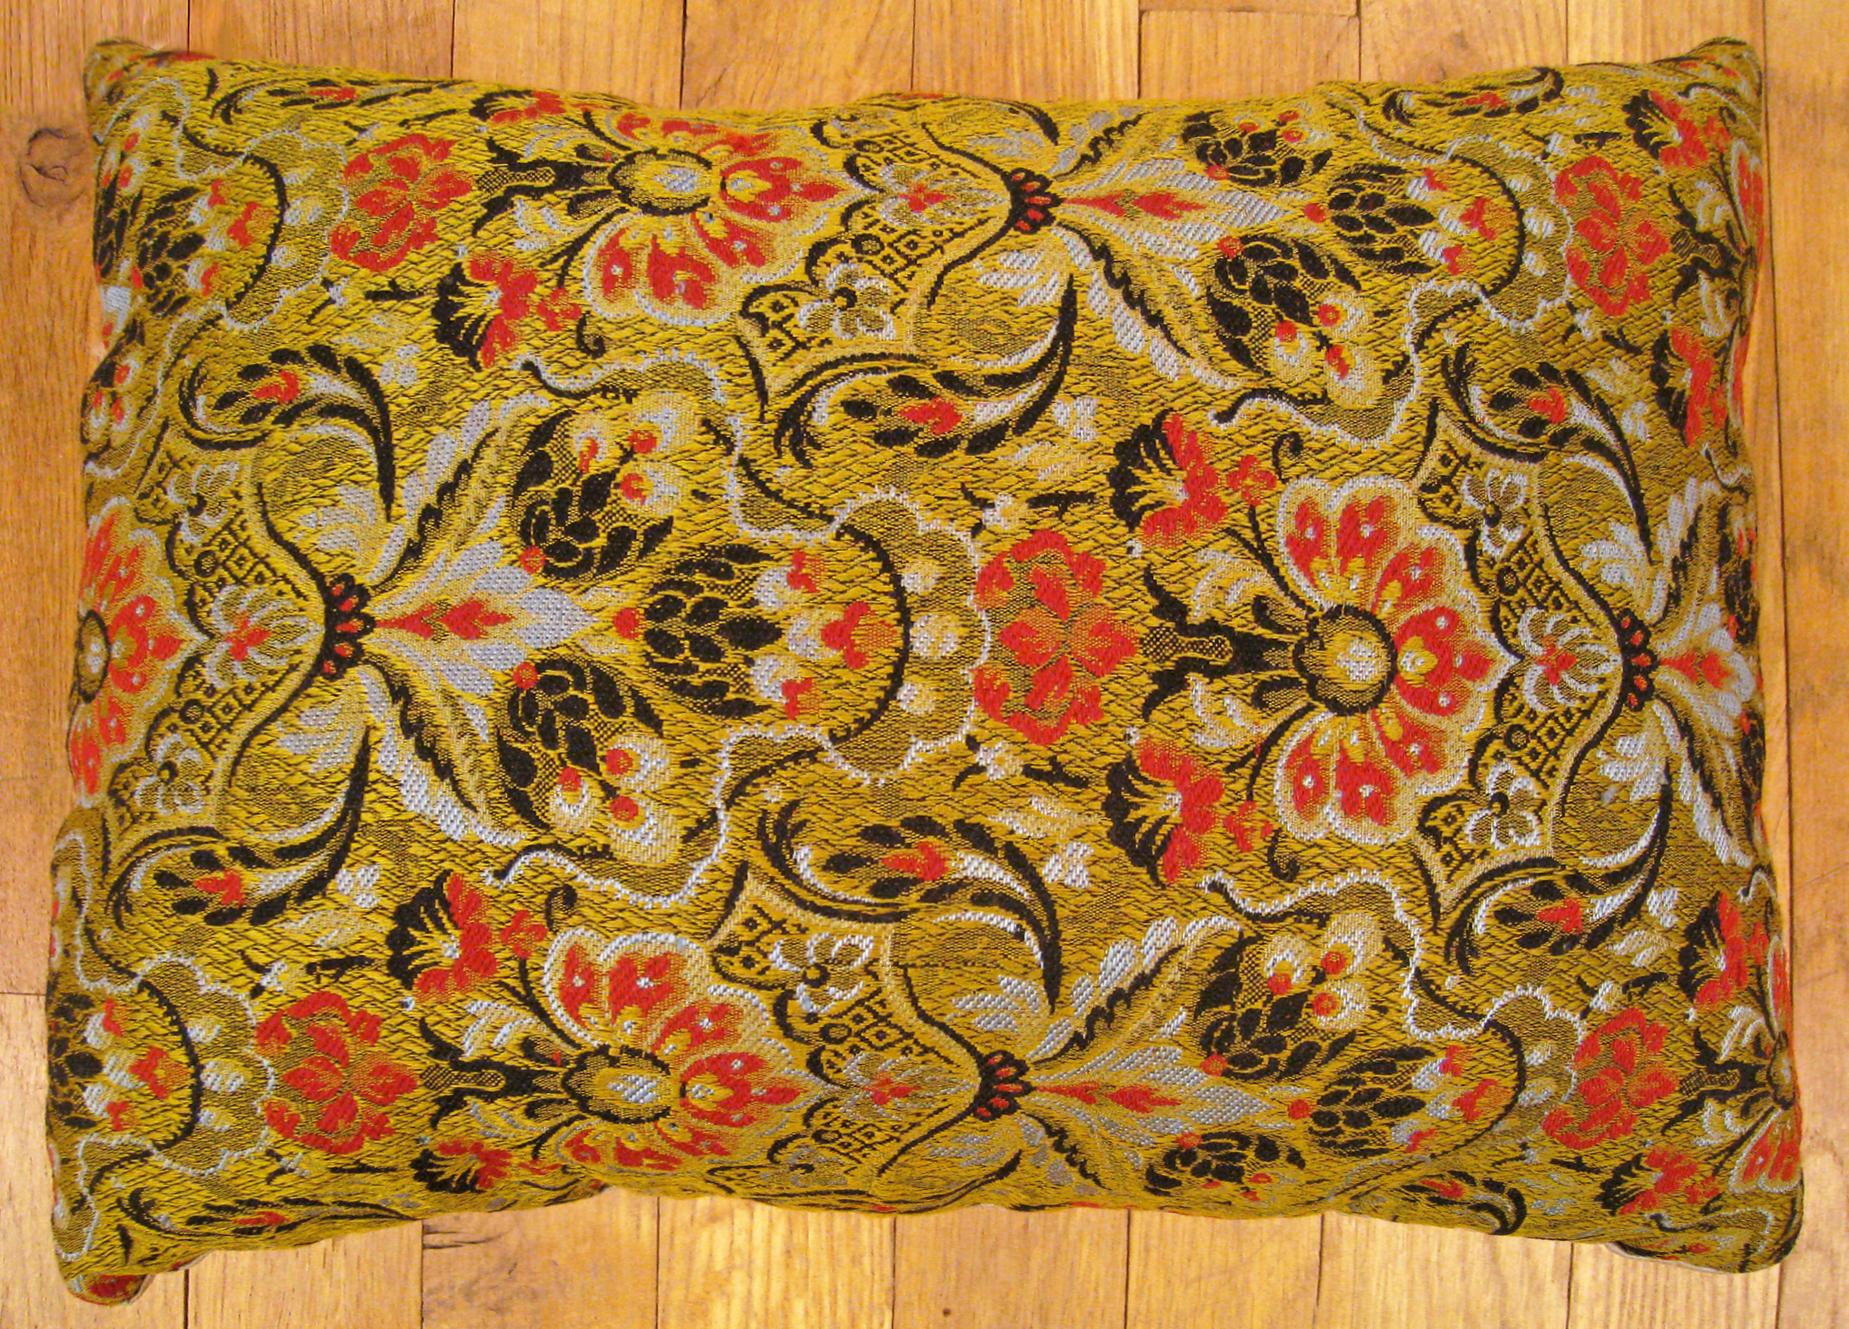 Antique Jacquard Tapestry Pillow; size 1'0” x 1'4”. 

An antique decorative pillow with floral elements allover a gold green central field, size 1'0